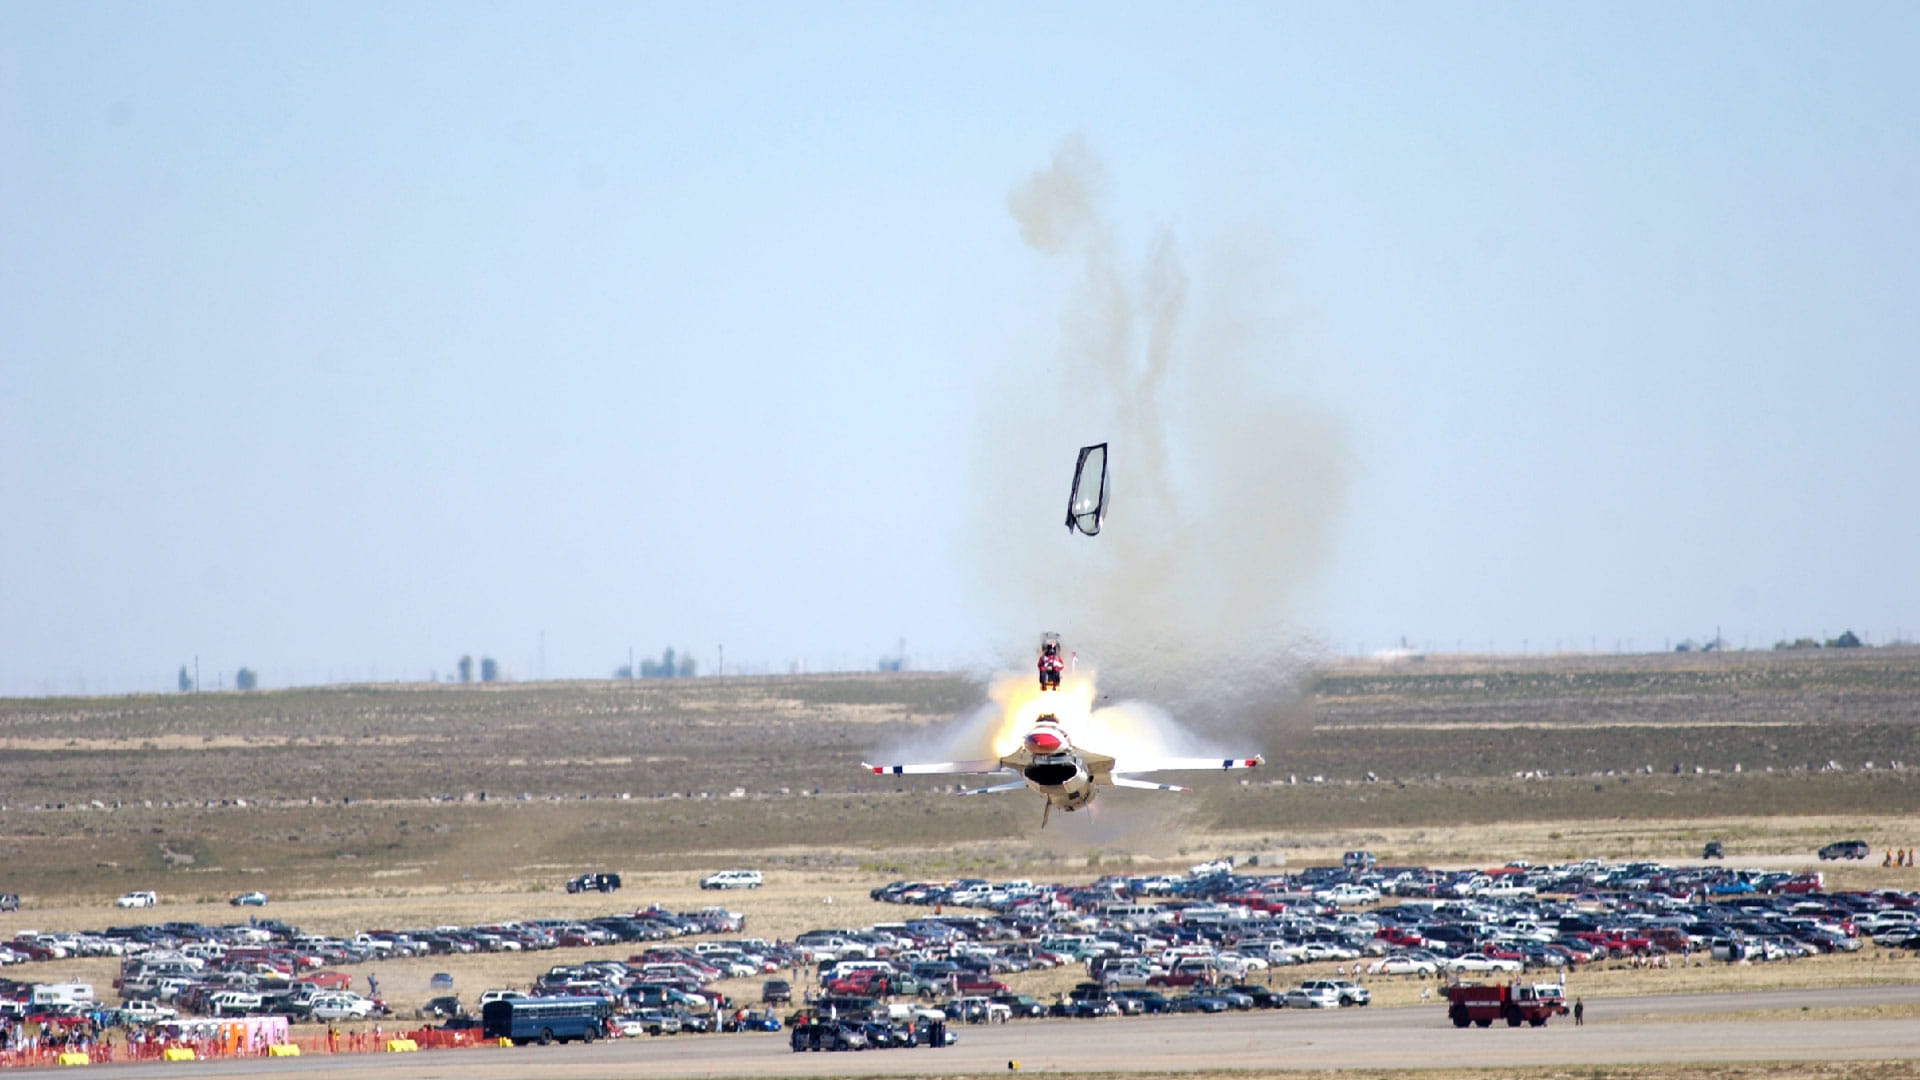 Ejection seat deploying during show